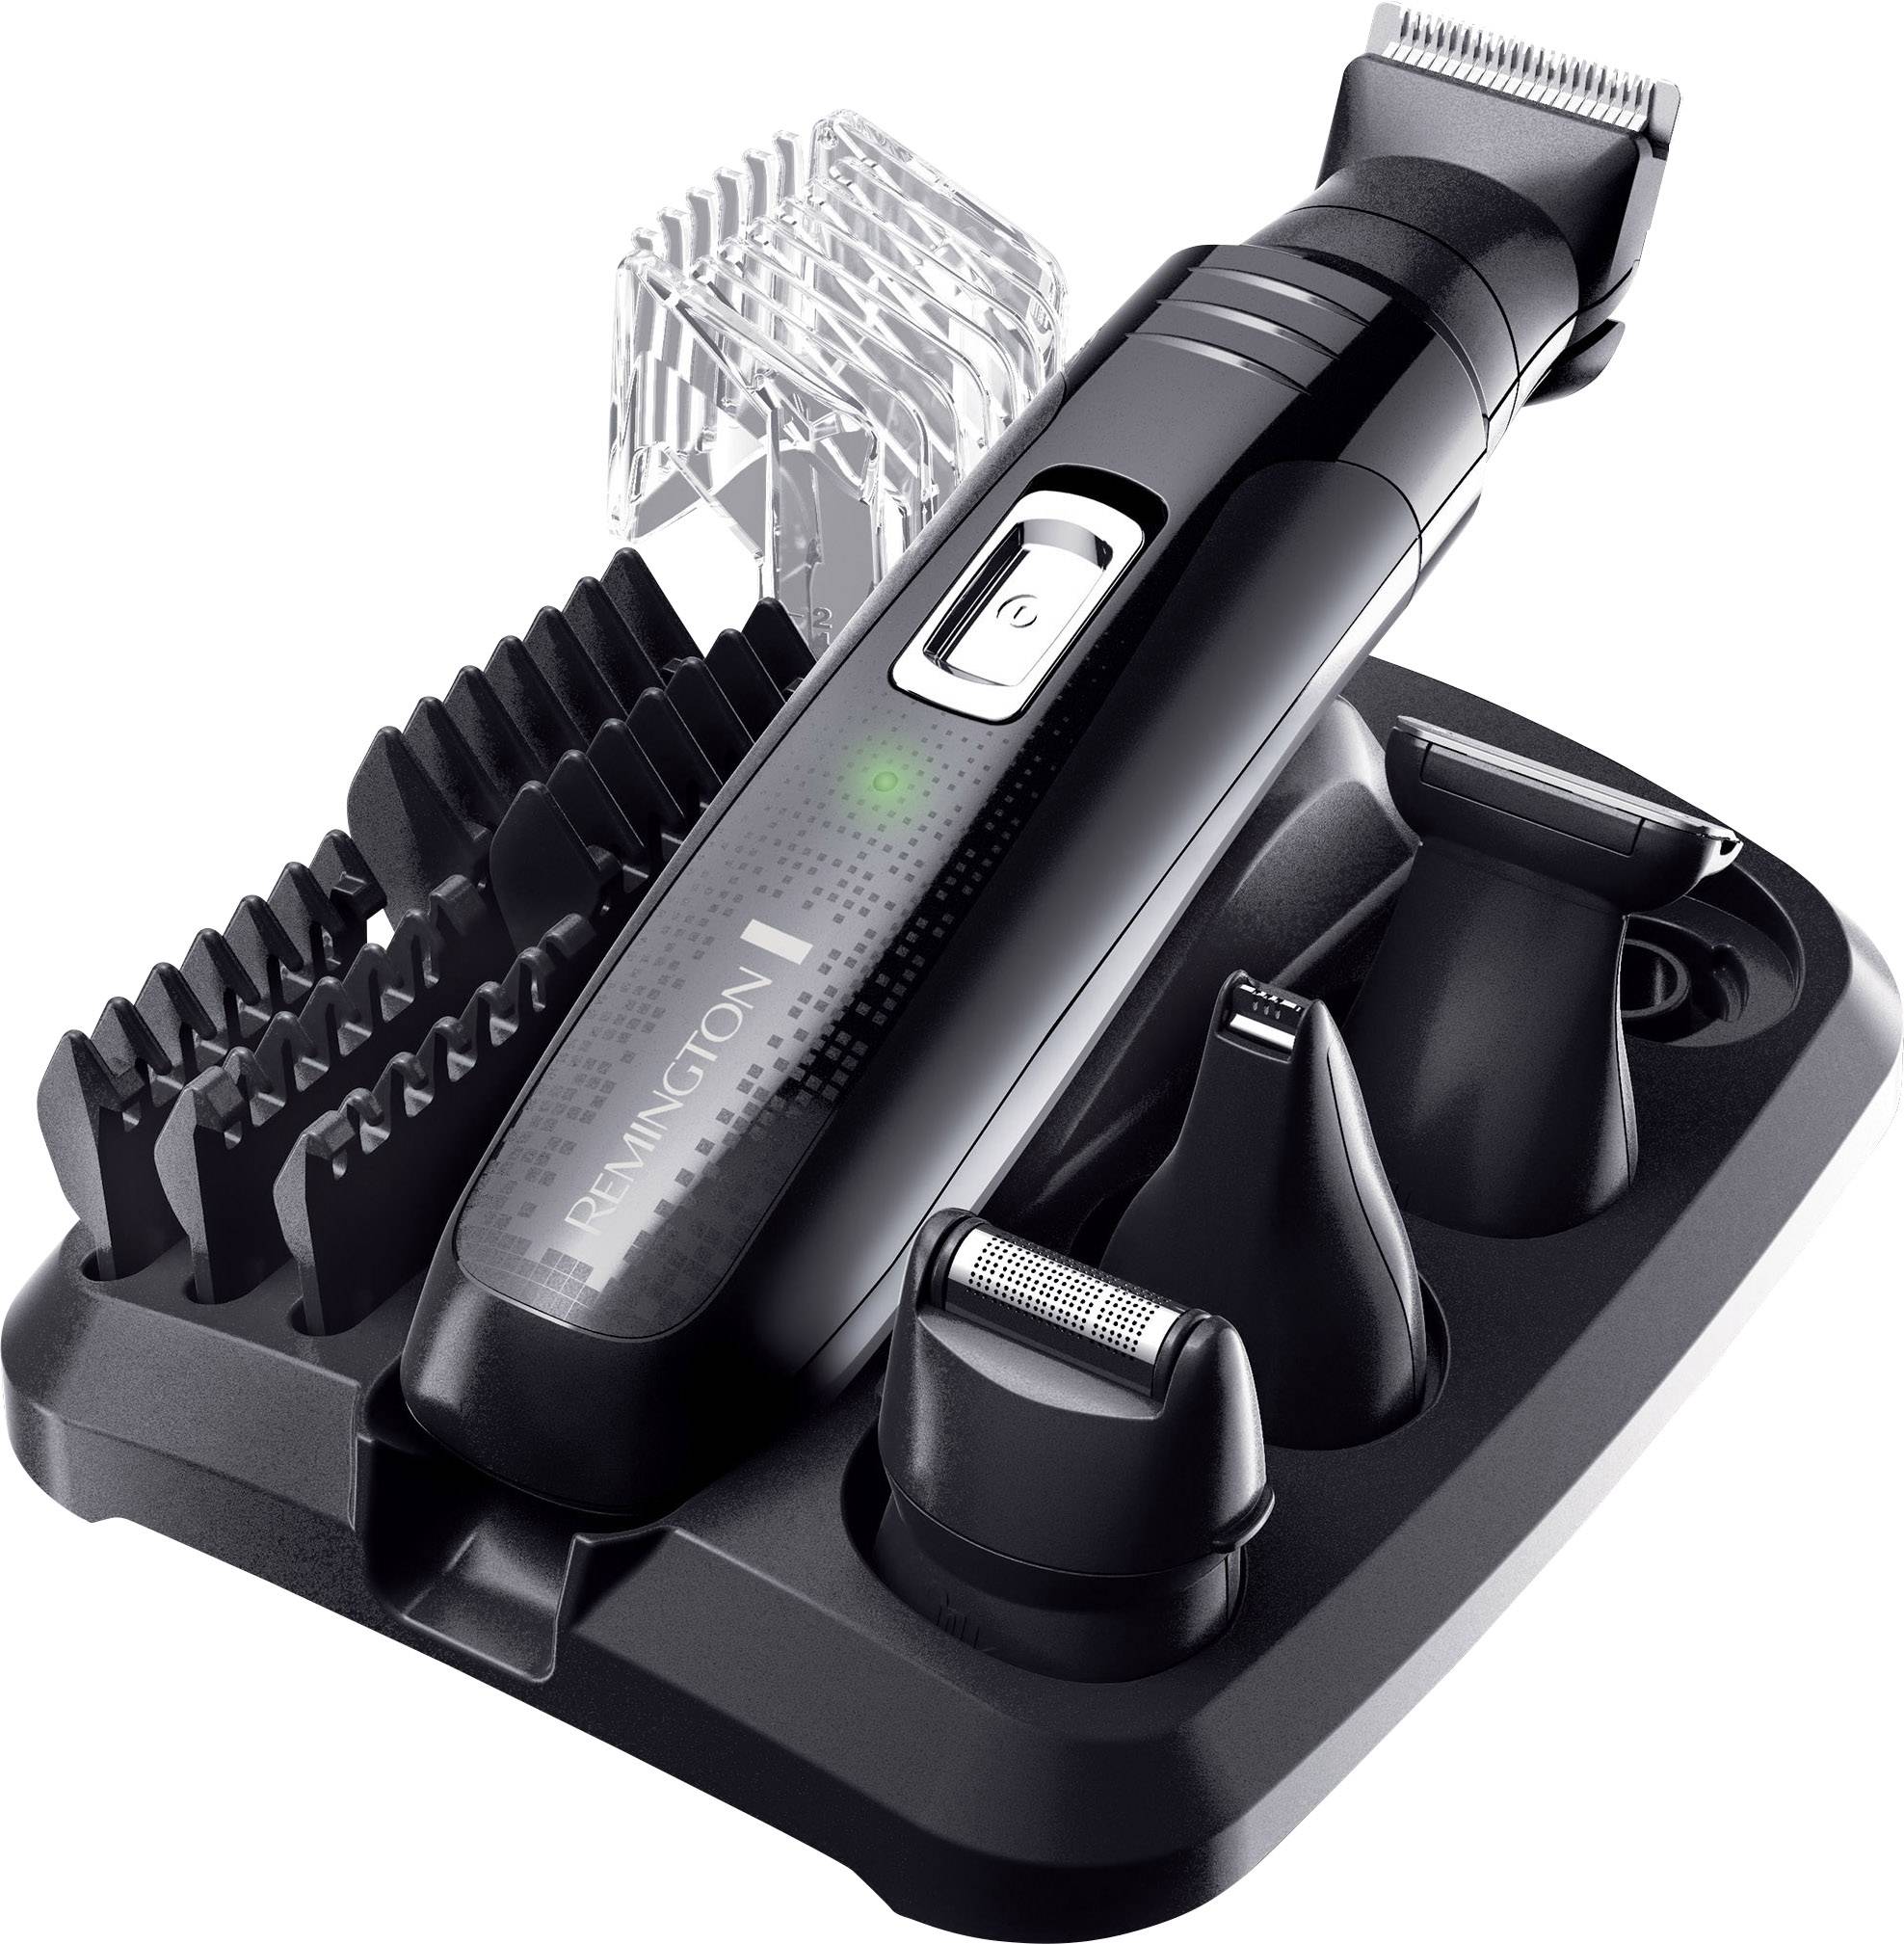 trimmer for body hair and beard